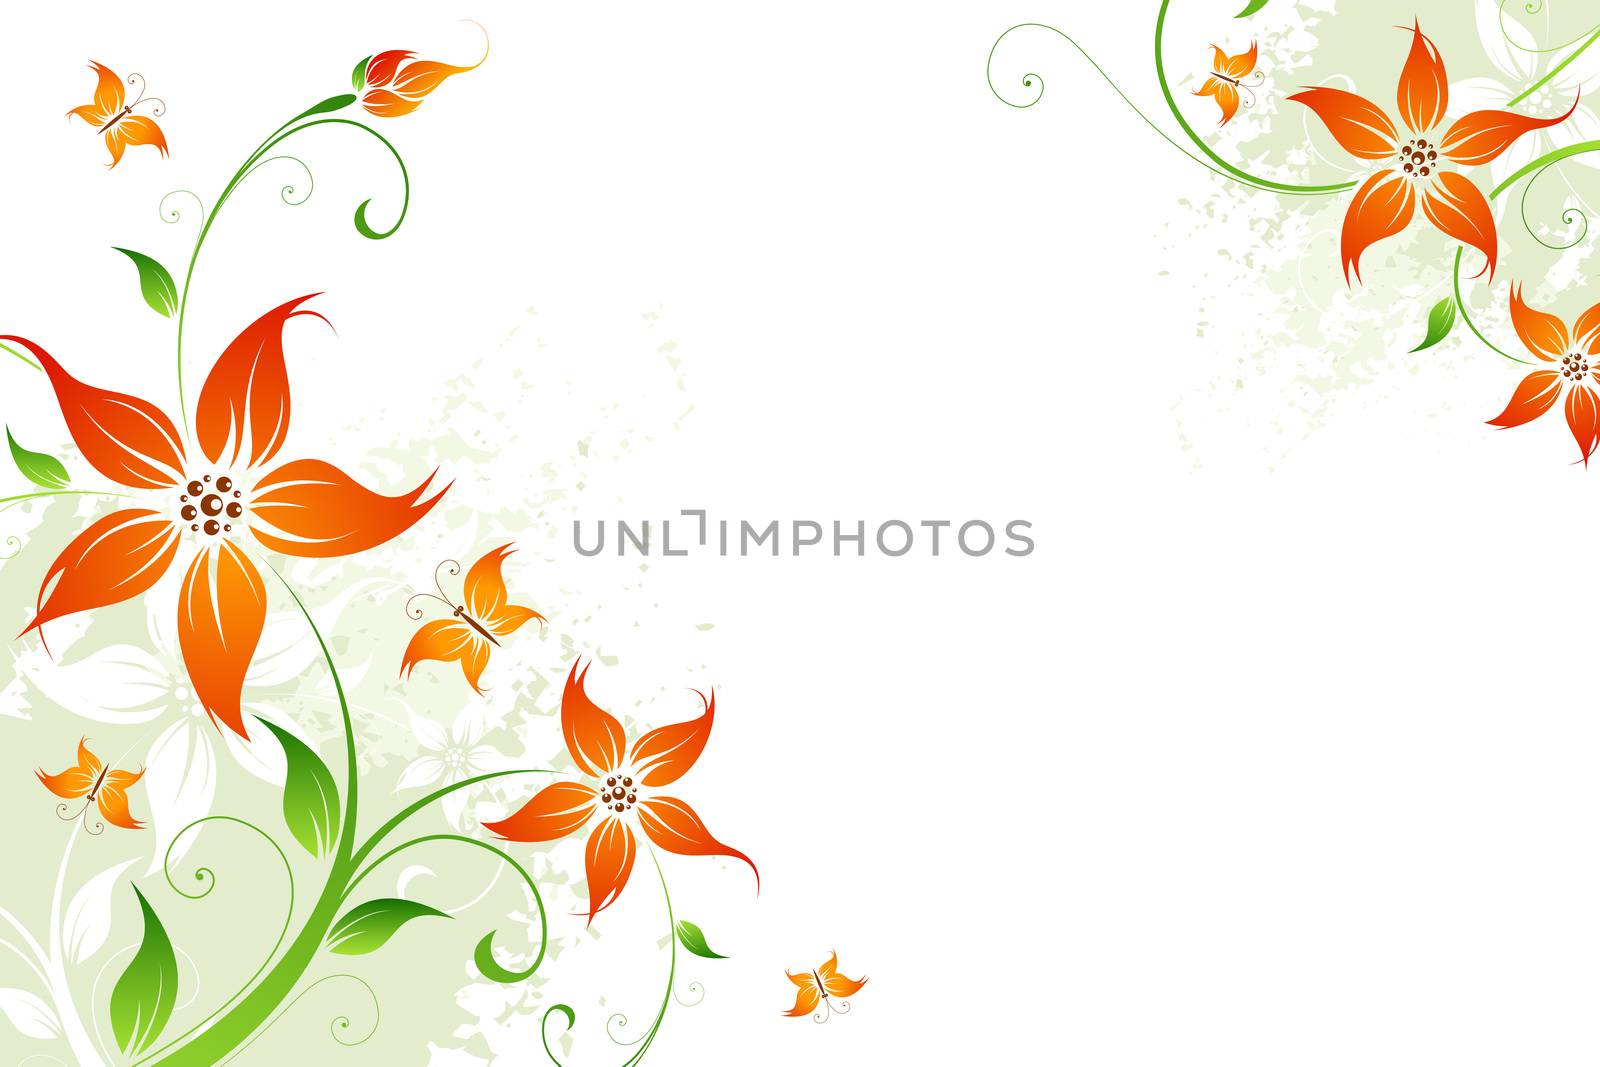 Abstract grunge background with flowers and butterfly for your design